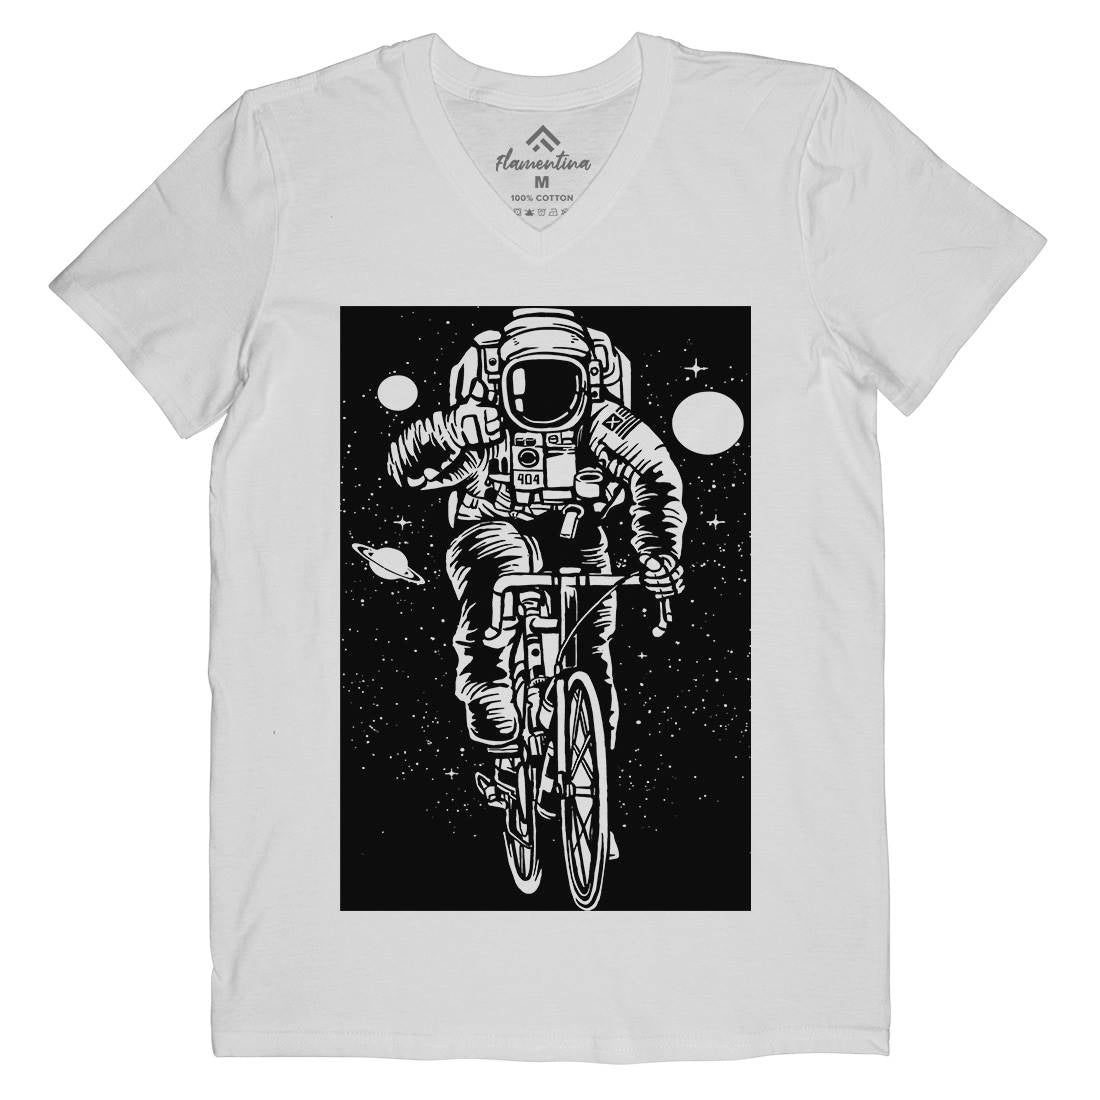 Astronaut Bicycle Mens Organic V-Neck T-Shirt Space A503